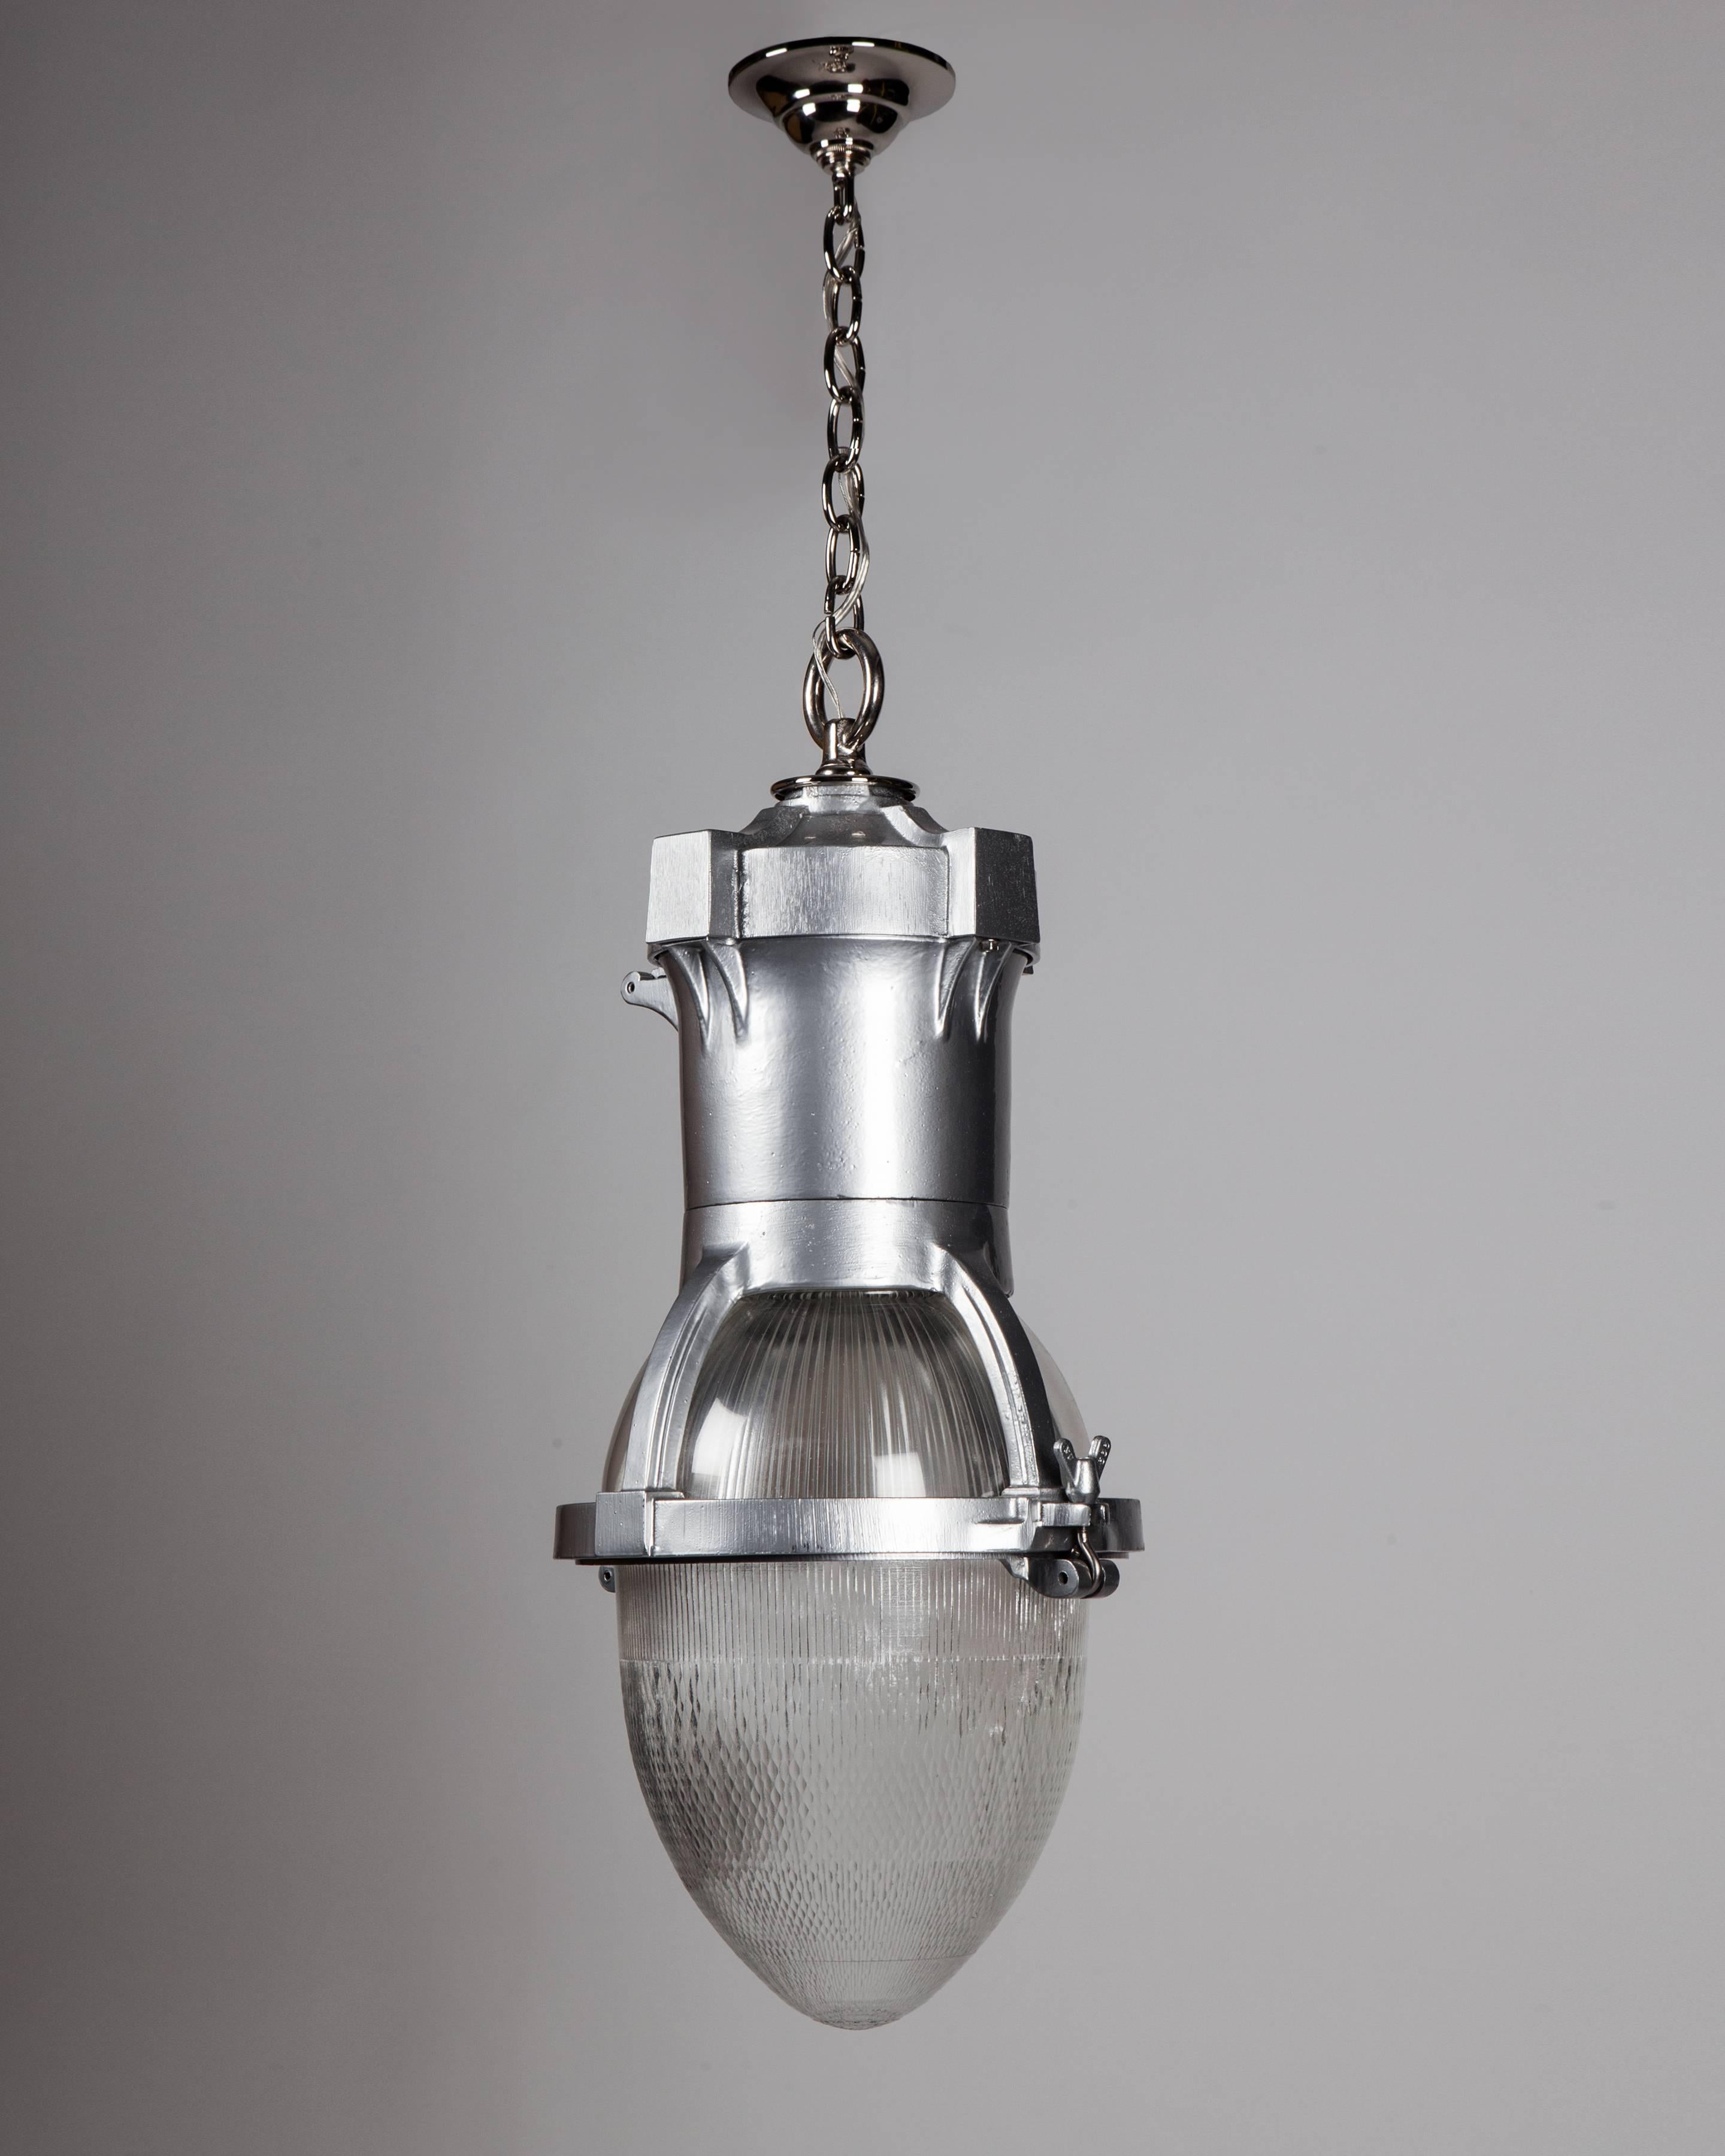 AHL4046

A vintage lantern having a two-part bullet shaped holophane glass lens and acrylic top cover in a cast aluminum frame and body, all in its original powdercoat finish. The body is suspended on polished nickel metalwork made in the Remains